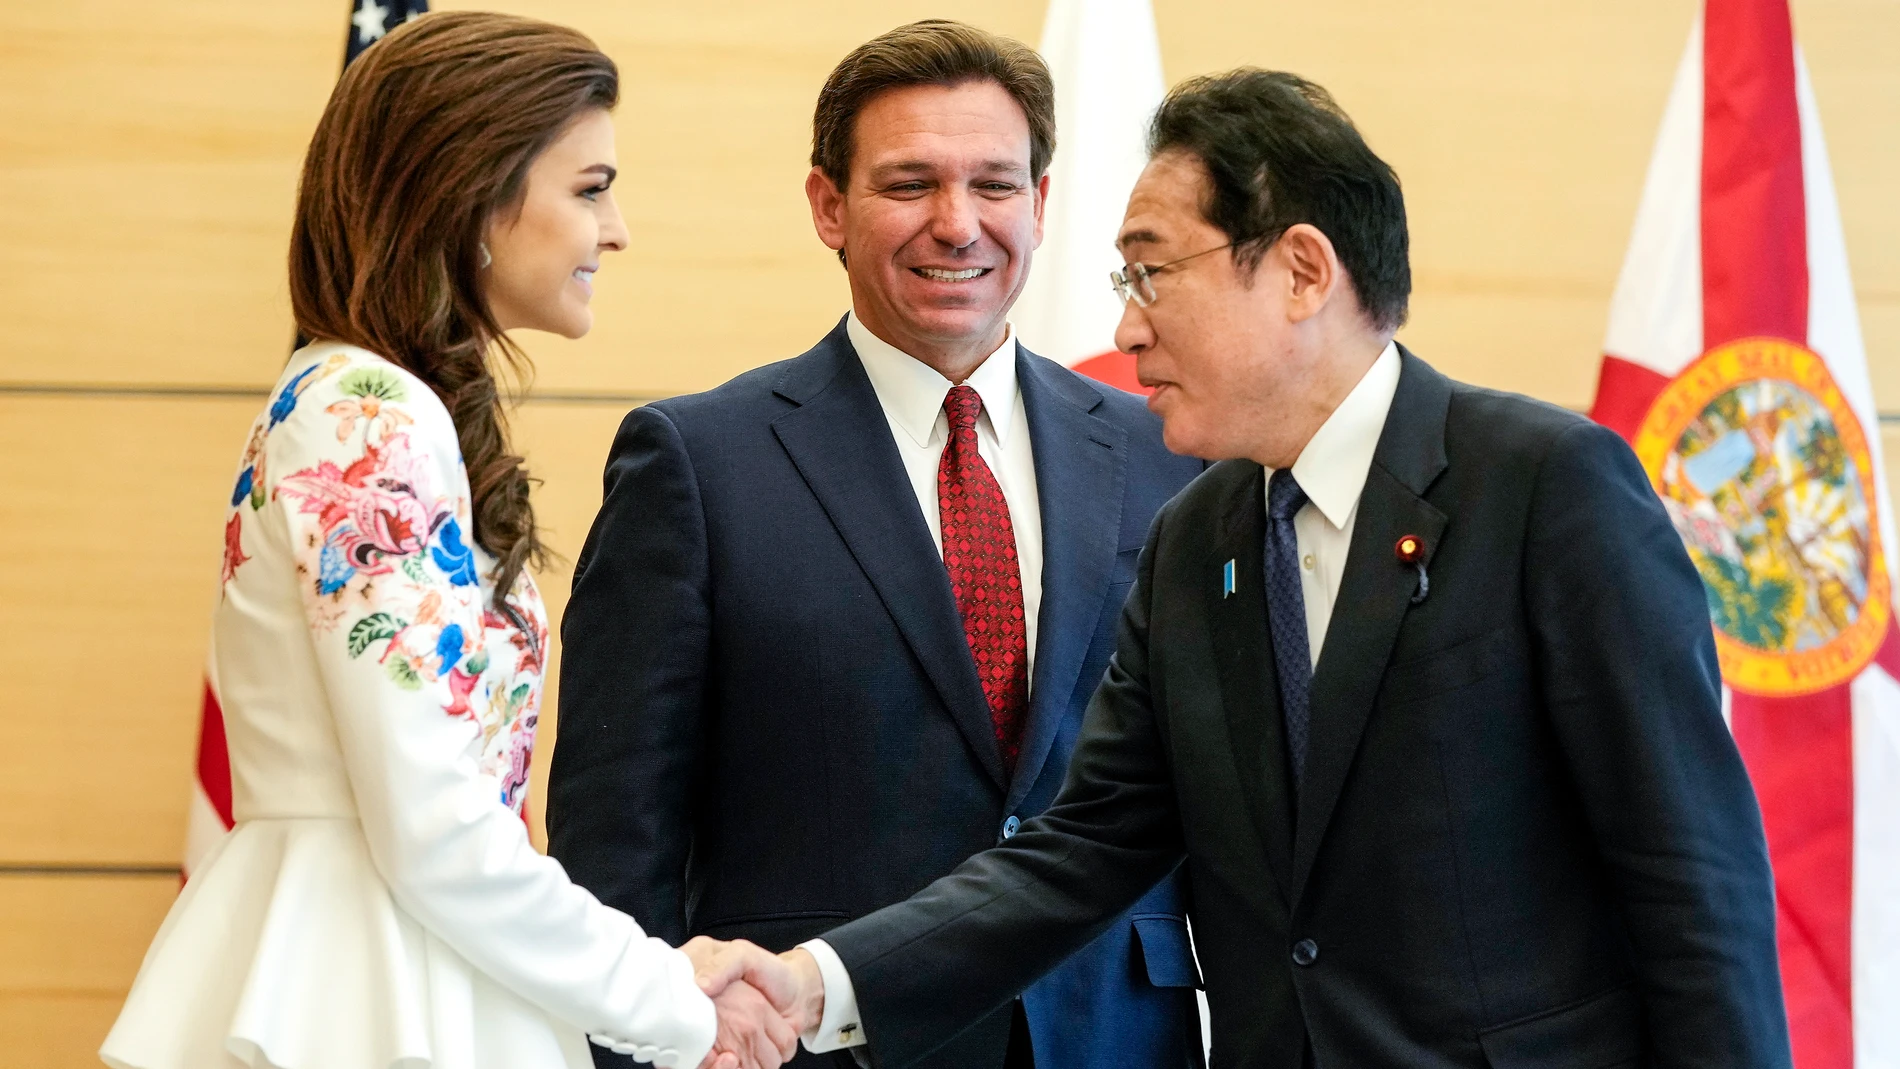 Tokyo (Japan), 23/04/2023.- Florida Governor Ron DeSantis (C) introduces his wife Casey (L) to Japanese Prime Minister Fumio Kishida (R) as he pays a courtesy call to Kishida at the latter's official residence in Tokyo, Japan, 24 April 2023. DeSantis, who is expected to be a Republican presidential candidate for 2024, is now in Japan for a two-day visit. Japanese Foreign Ministry said on 21 April 2023 that DeSantis's visit to Japan will be an opportunity to further strengthen relationship between Japan and Flodrida in broad areas including political and economic fields. (Japón, Estados Unidos, Tokio) EFE/EPA/KIMIMASA MAYAMA / POOL 